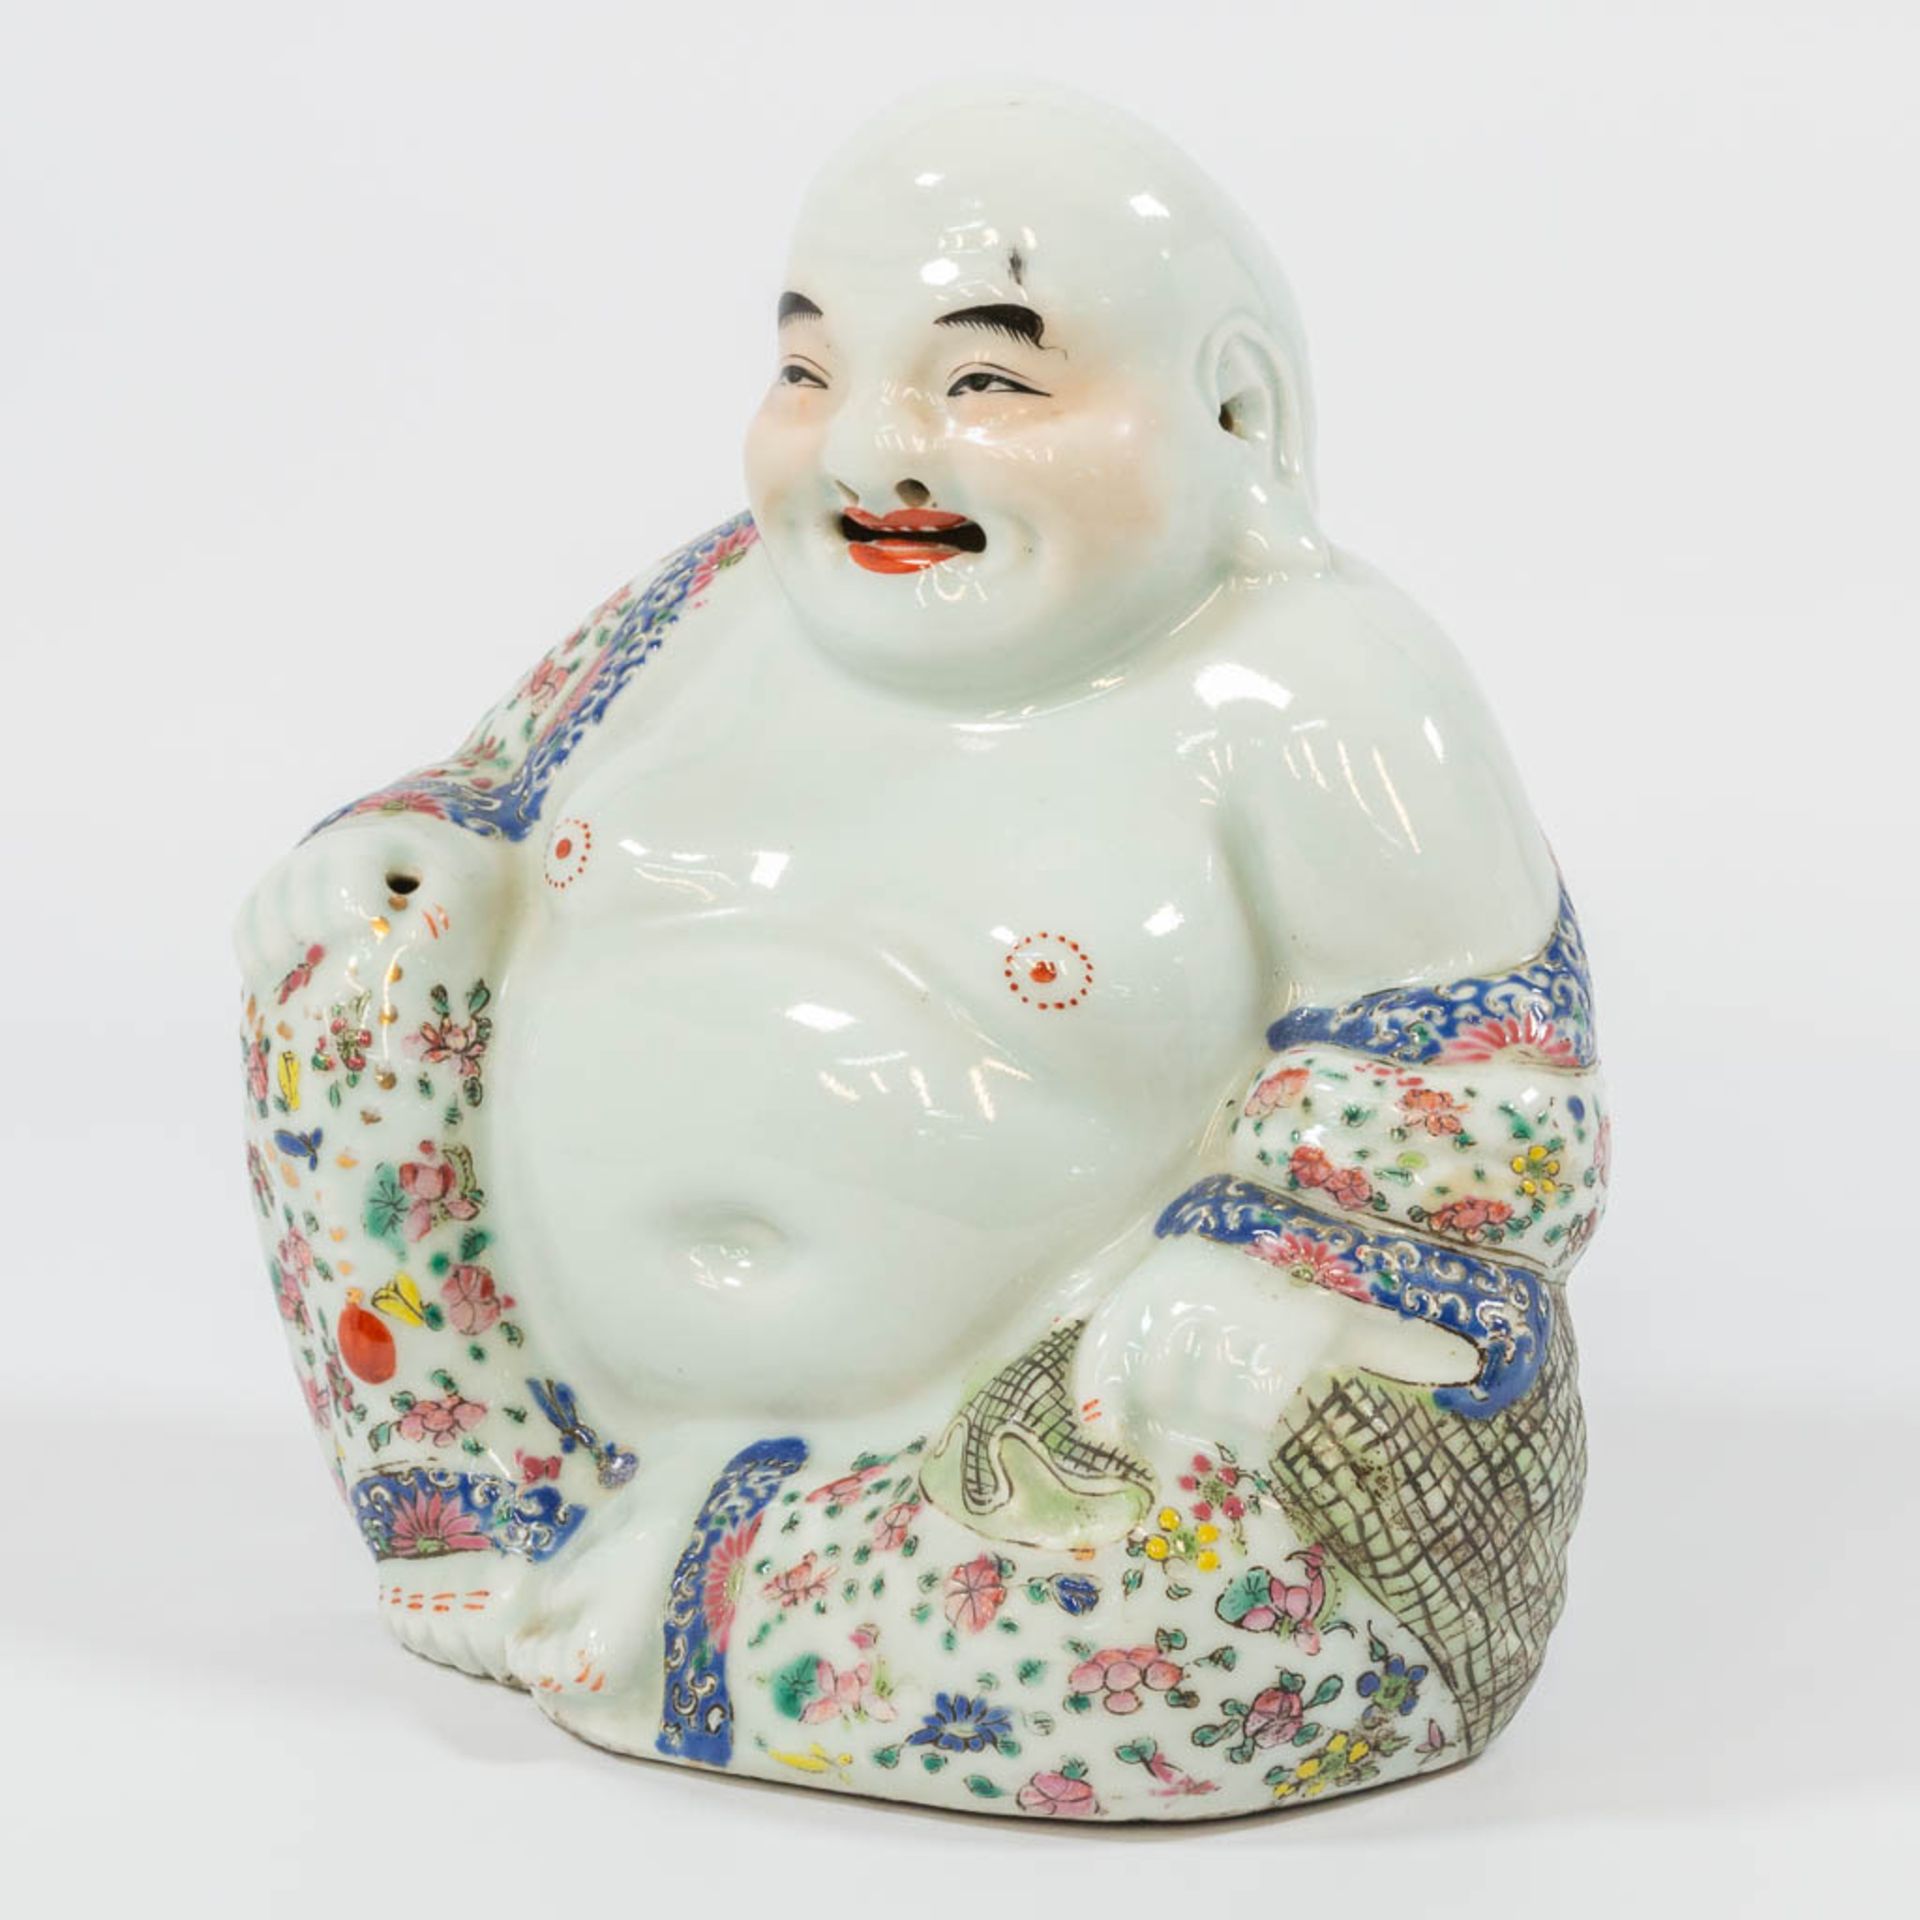 A Chinese laughing buddha, made of porcelain. - Image 7 of 27